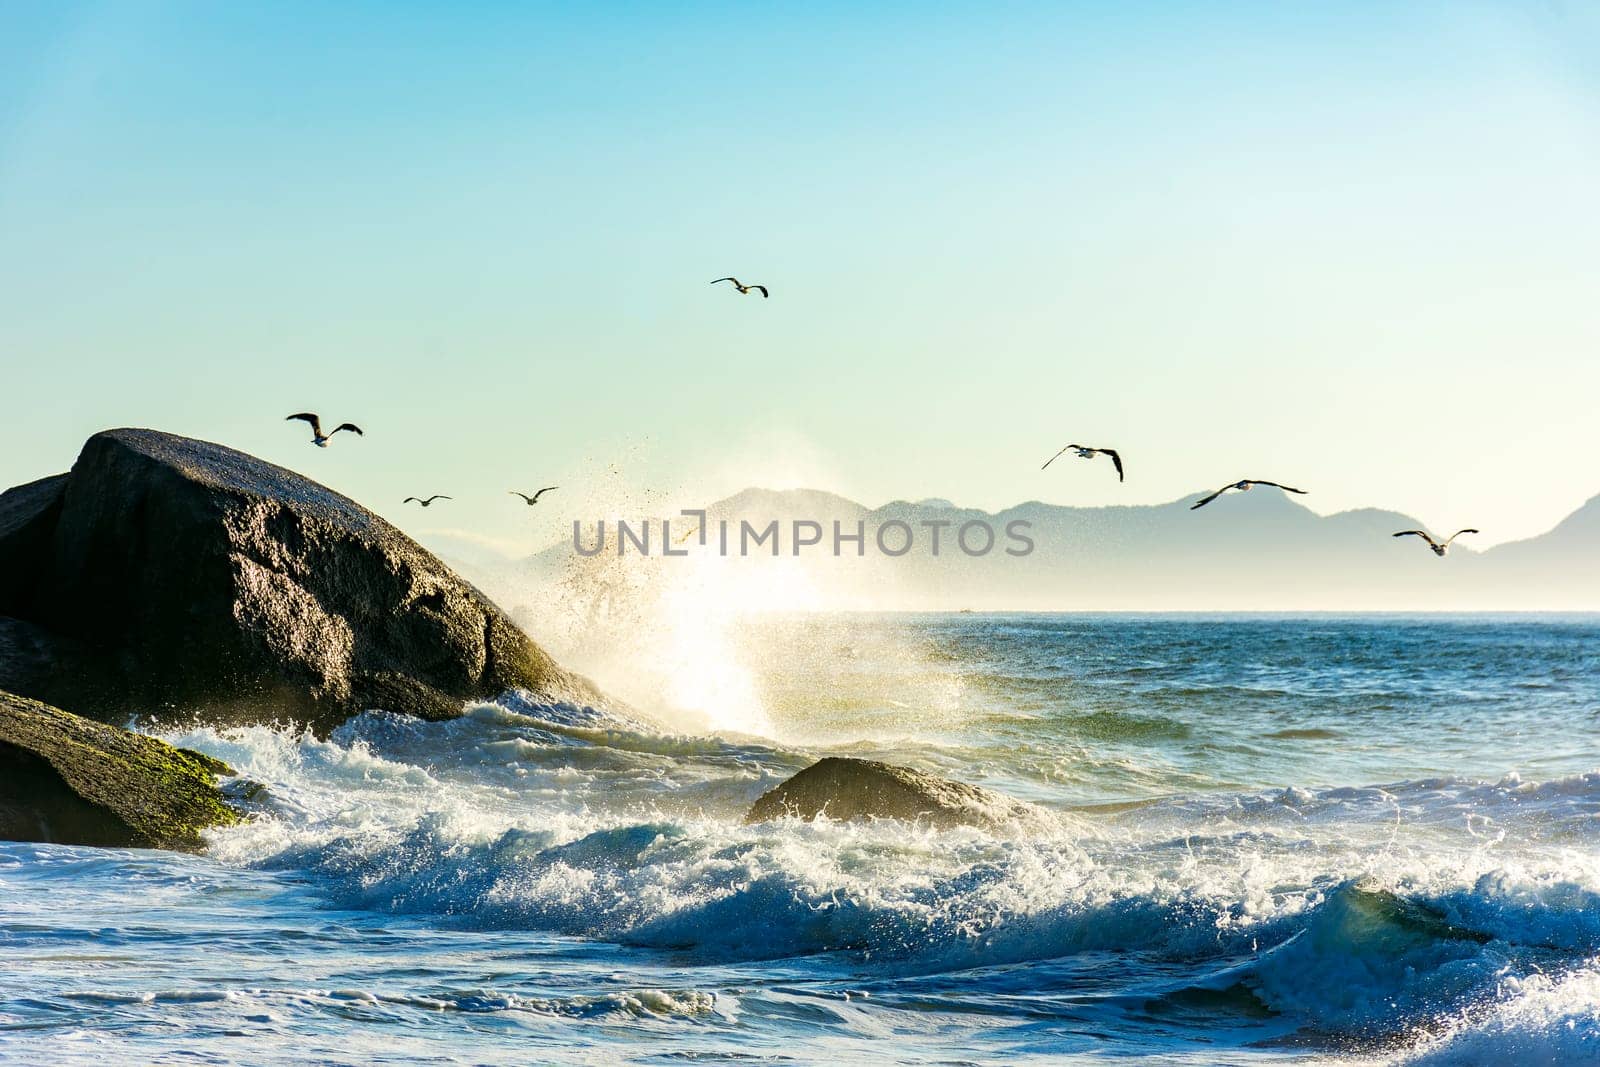 Seagulls over the sea waves at Devil Beach between Copacabana and Ipanema in Rio de Janeiro during sunrise